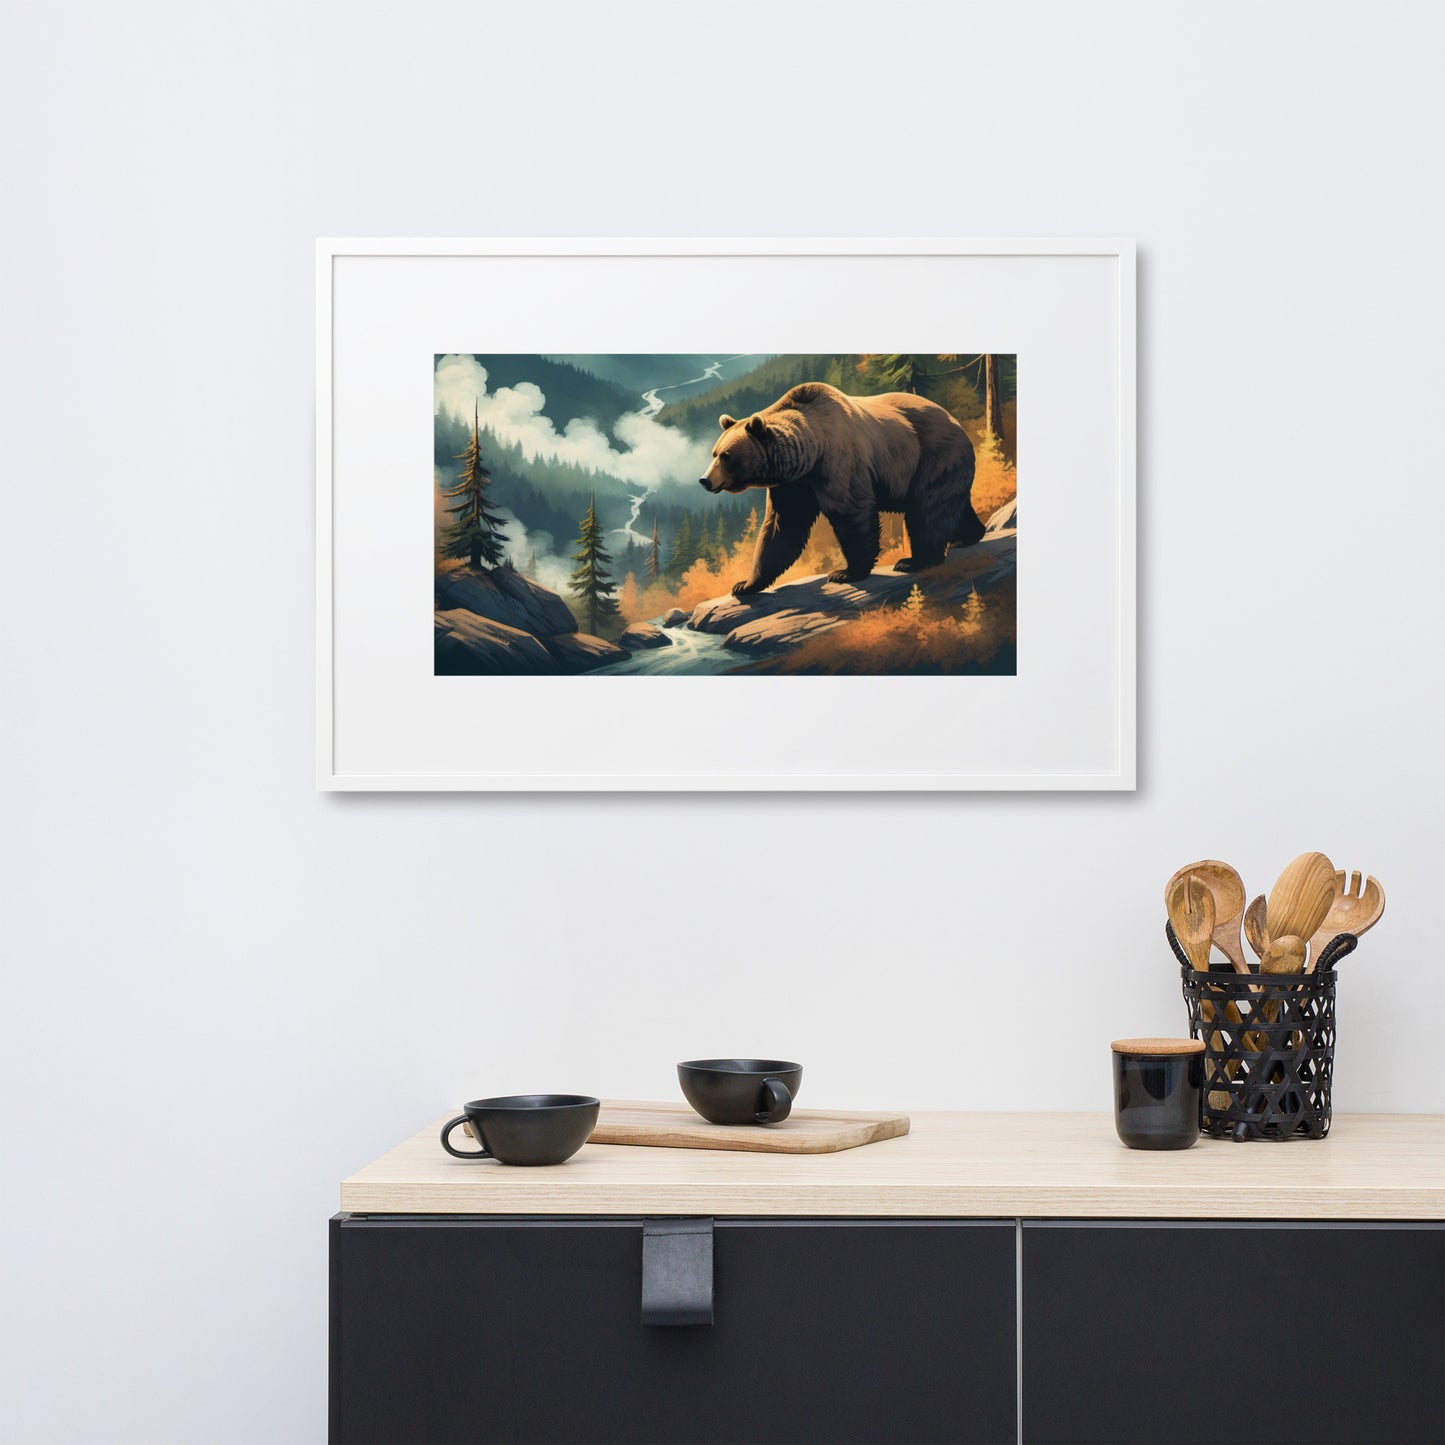 Grizzly in Mountains - Framed Poster